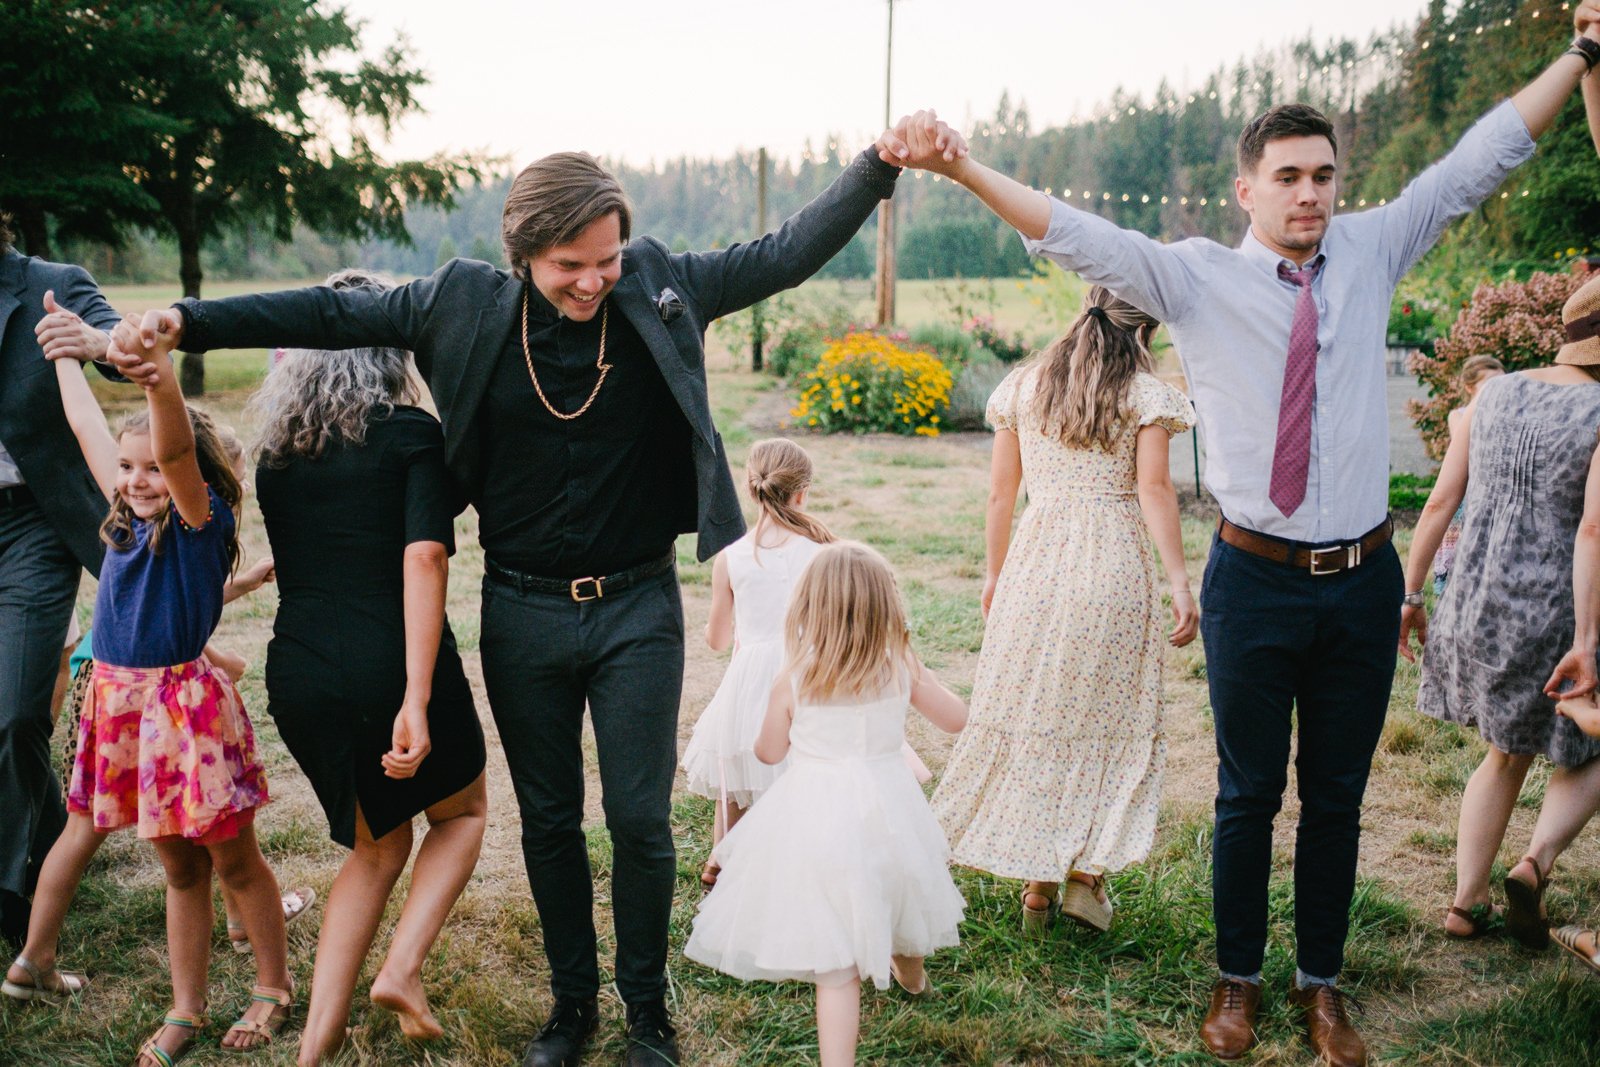  Officiant and guests lock arms in English line dancing 